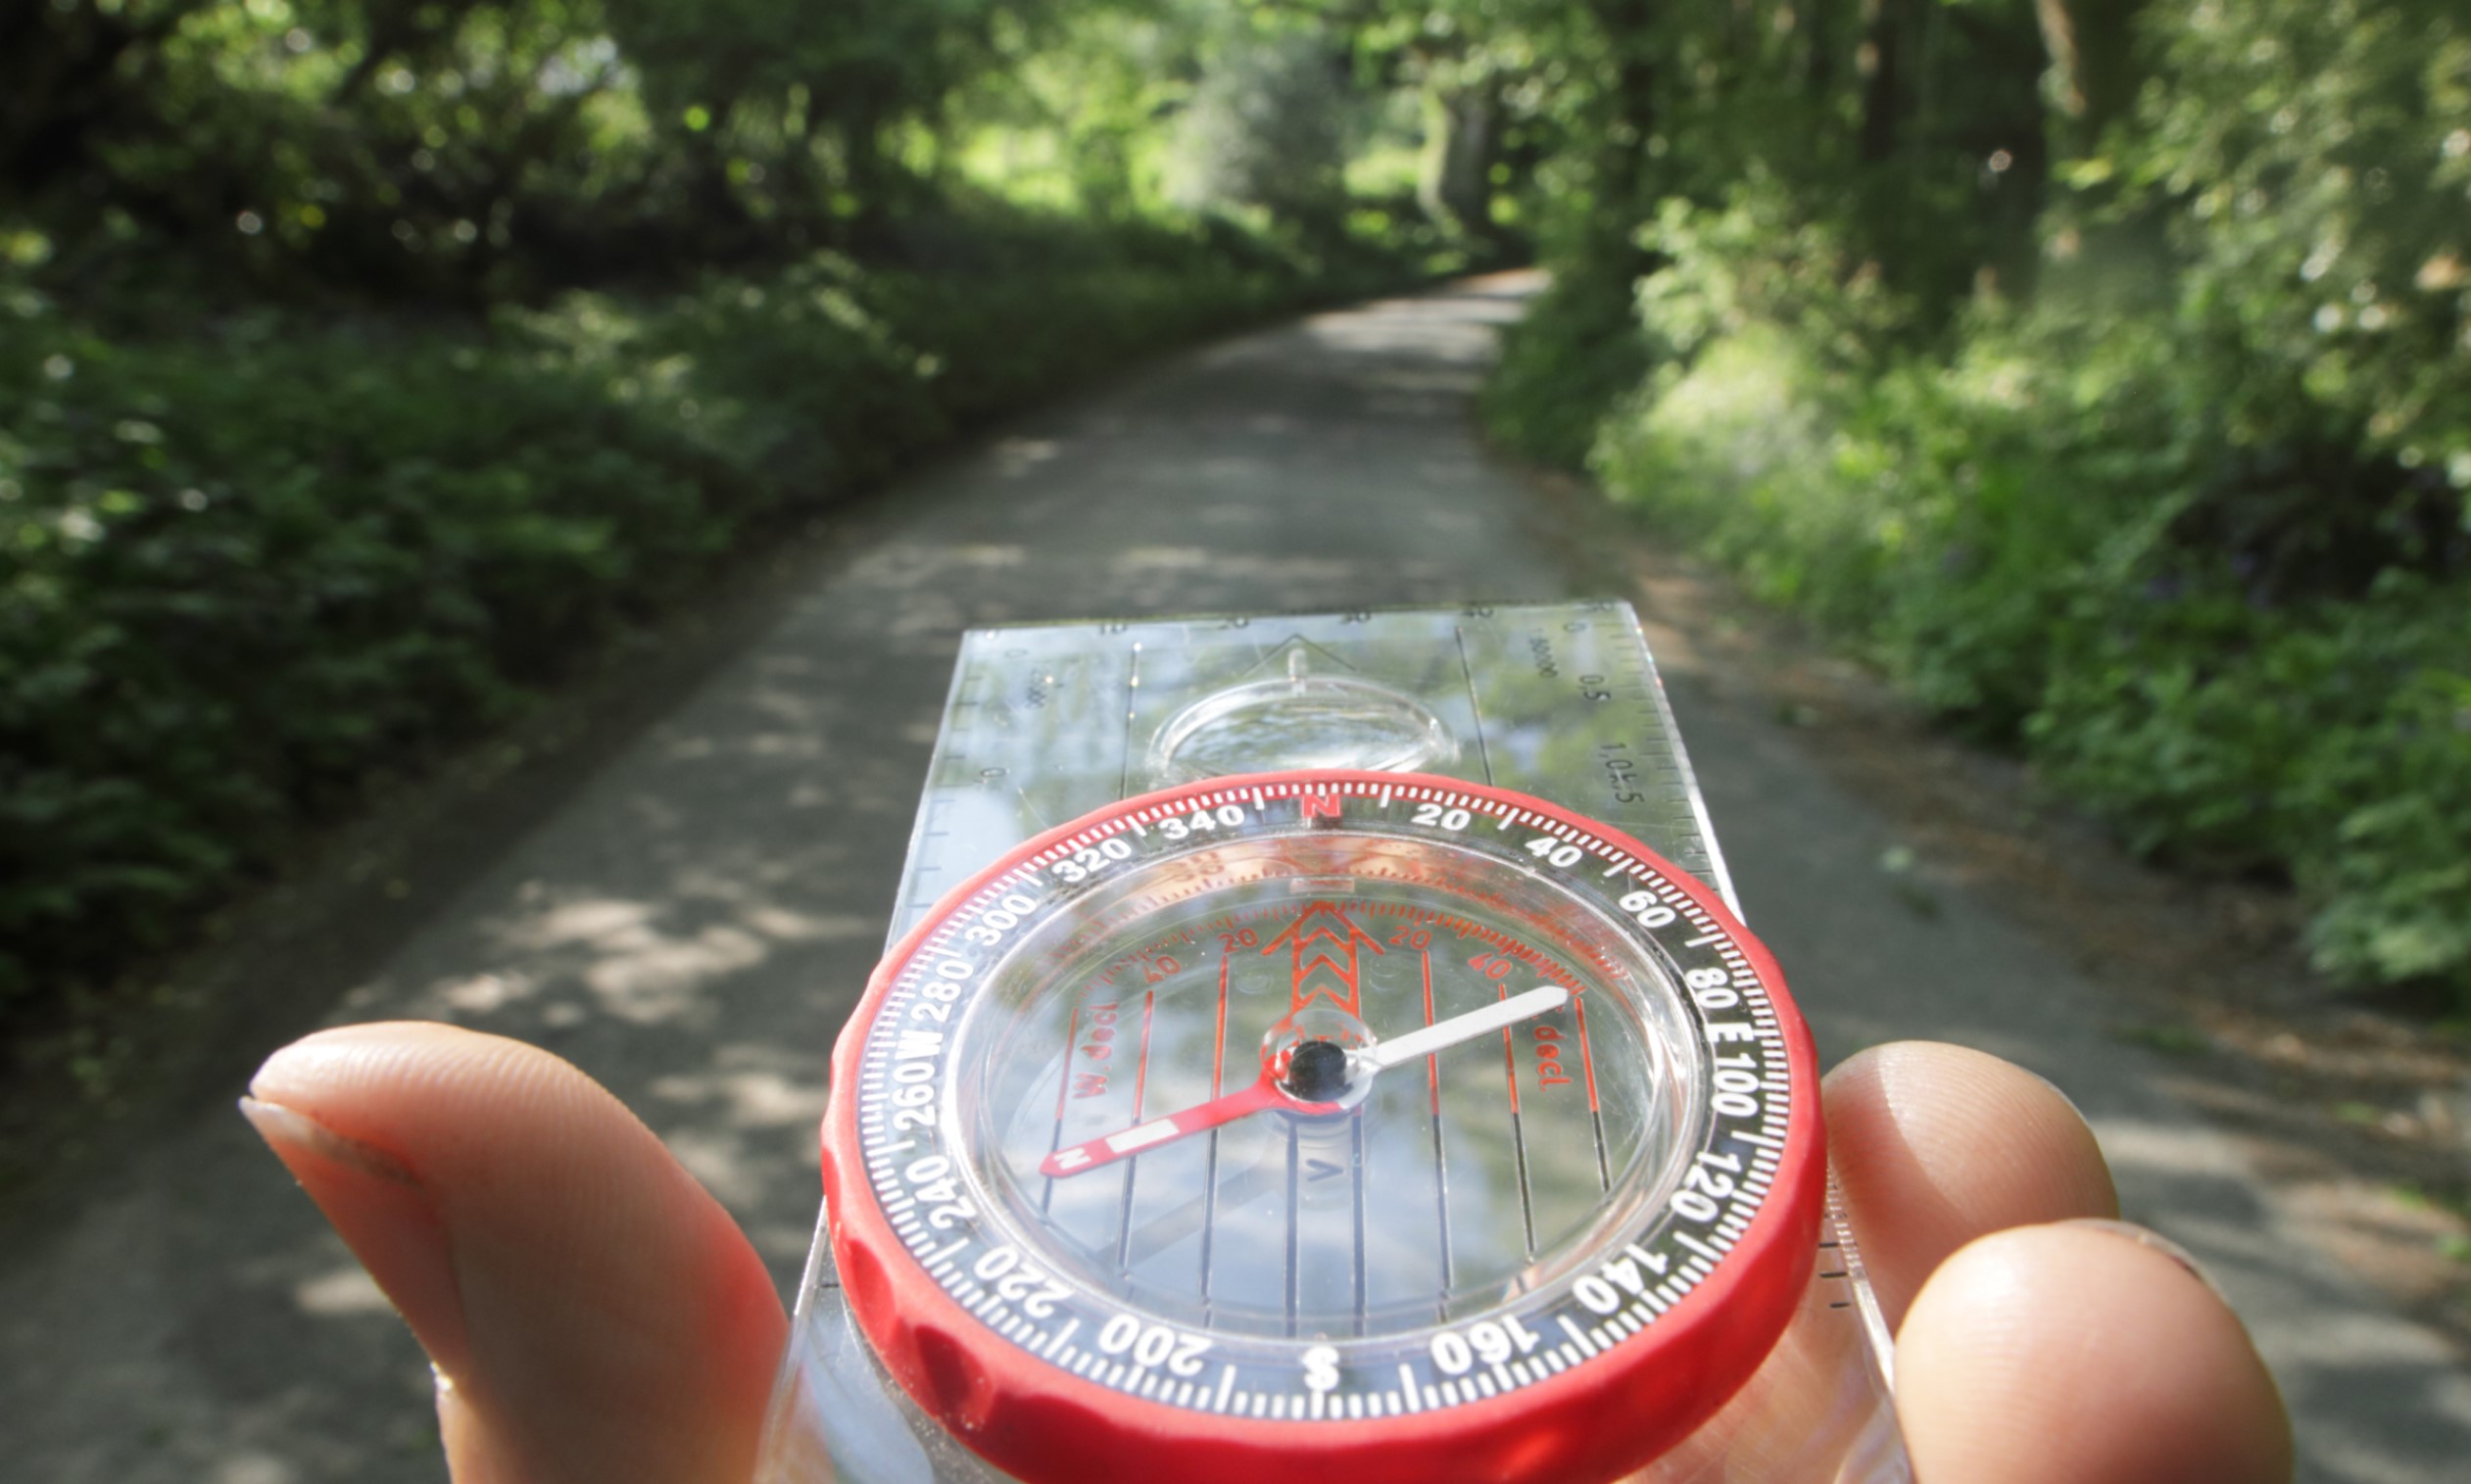 Human outside on paved path through trees with their hand holding a compass in front of them.